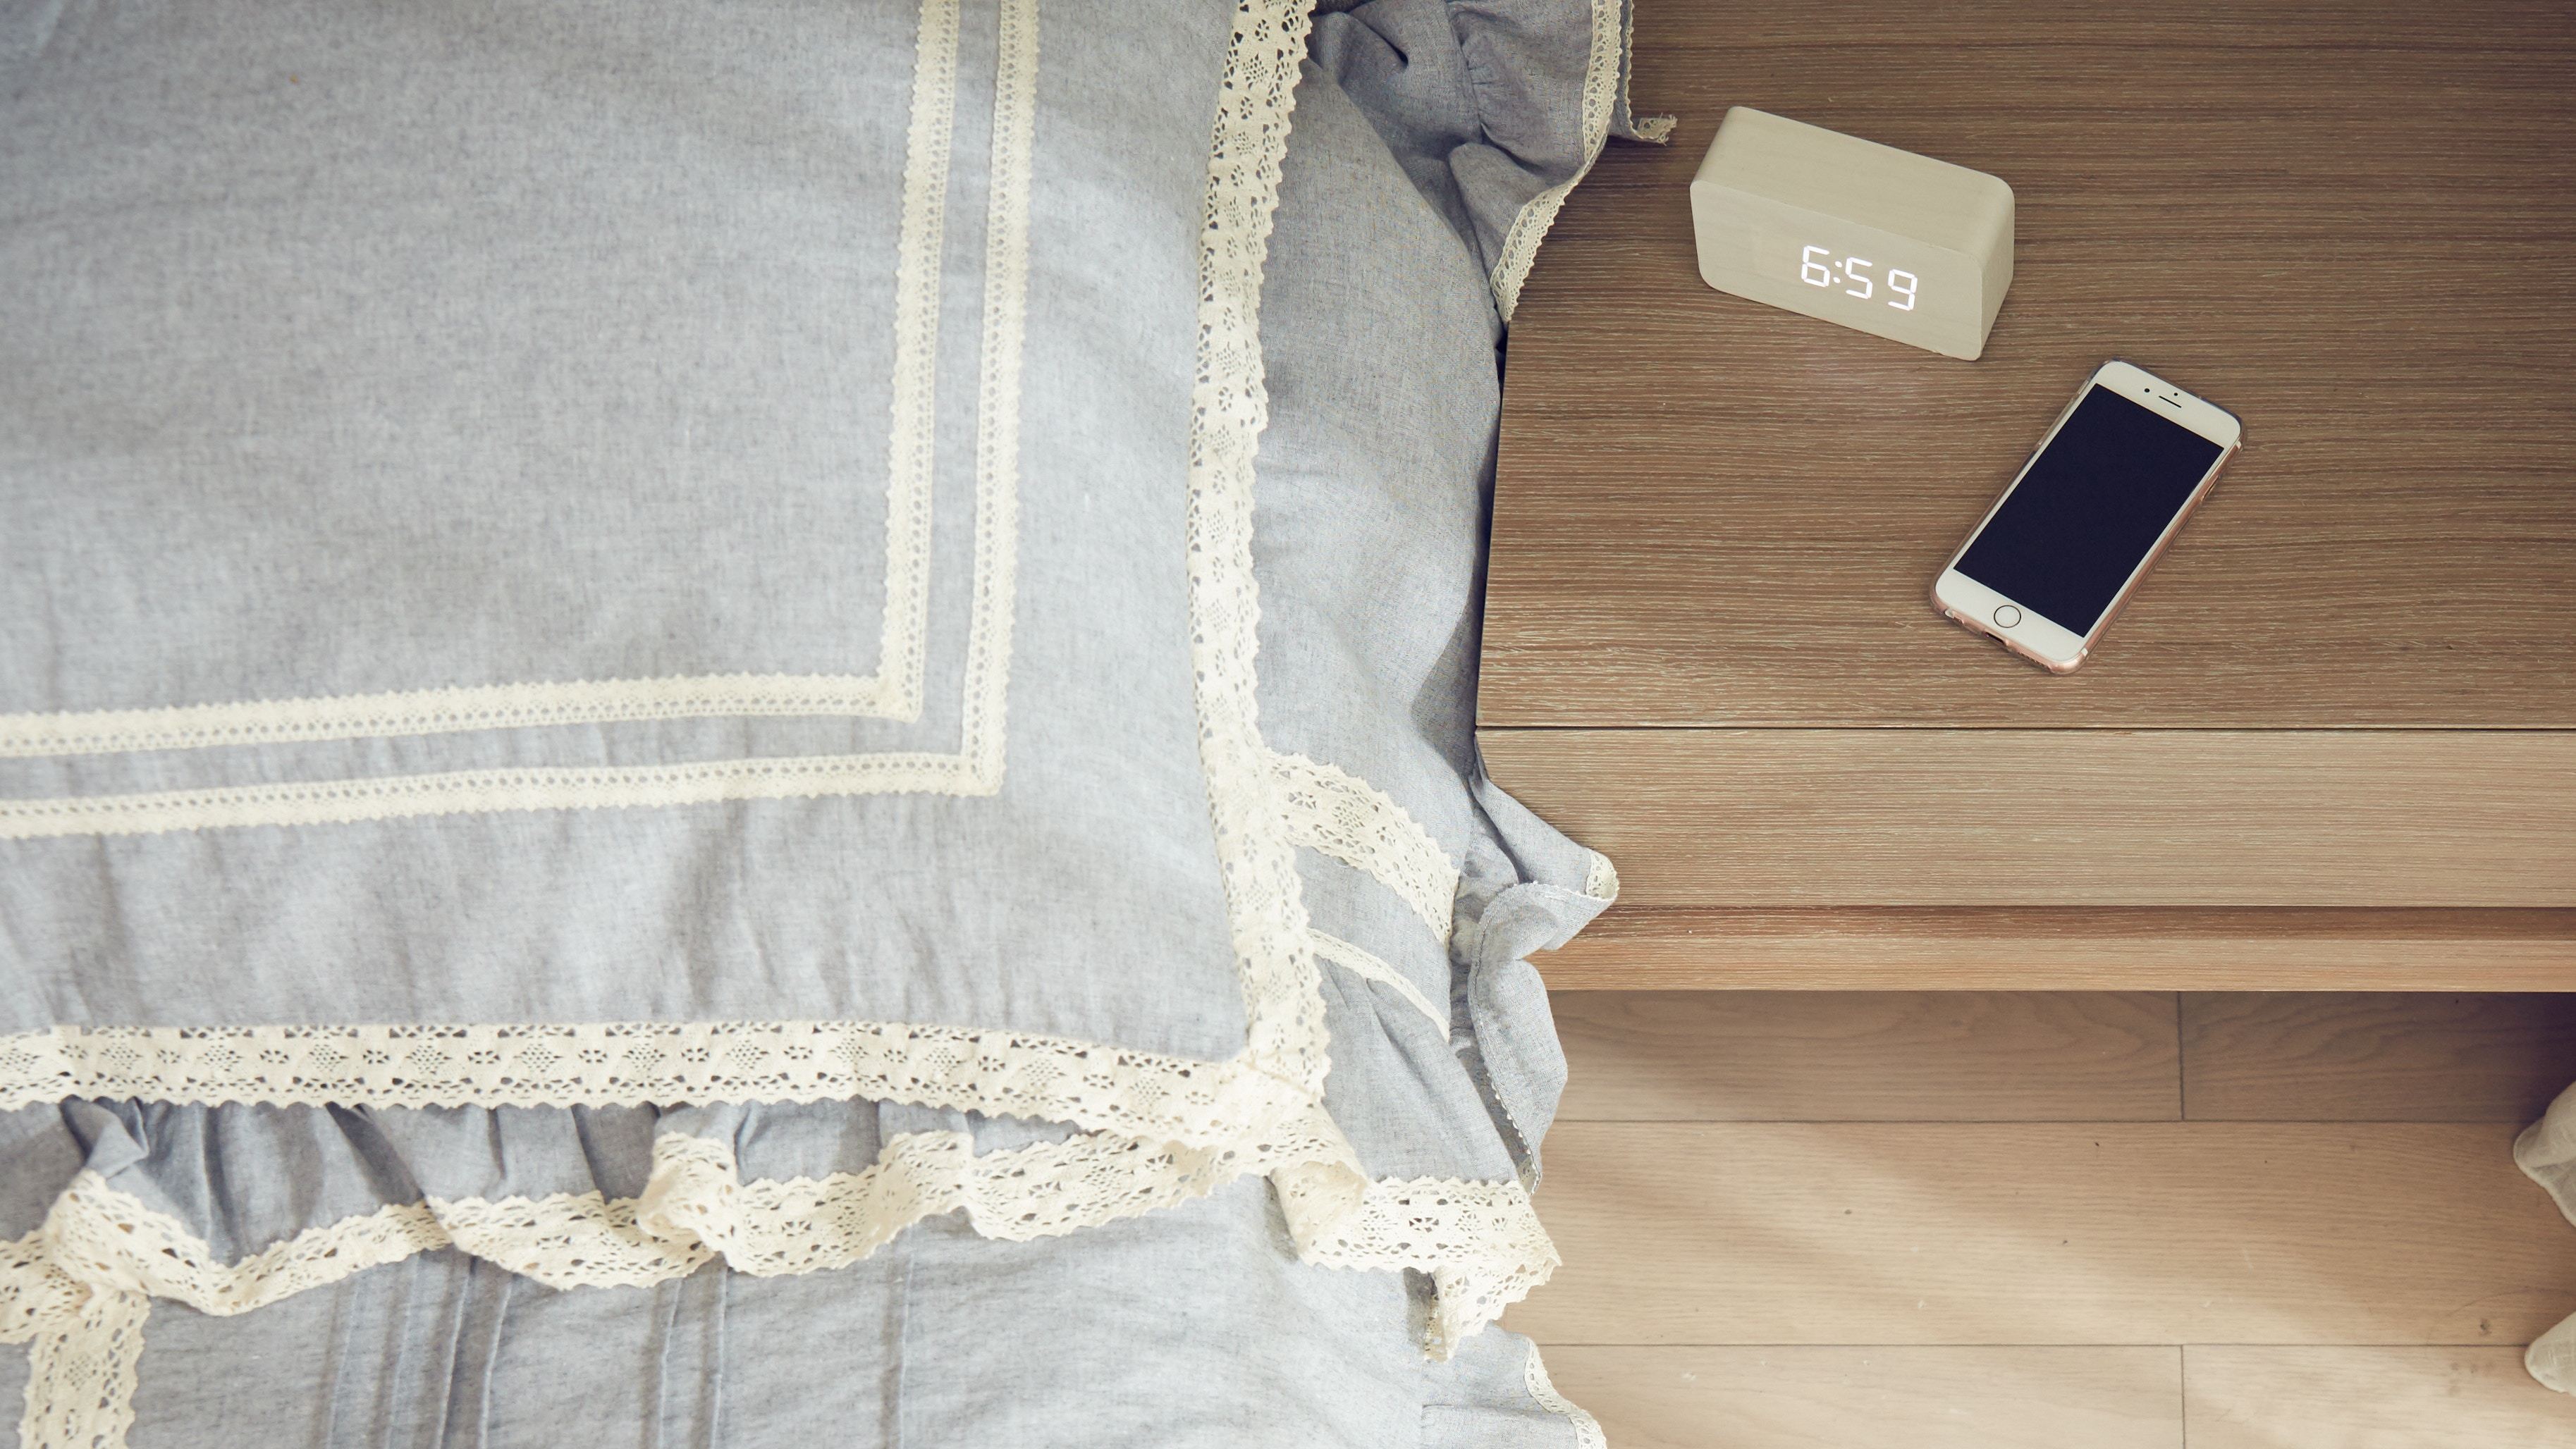 Get Help Waking Up With These Quirky Alarm Clock Apps 